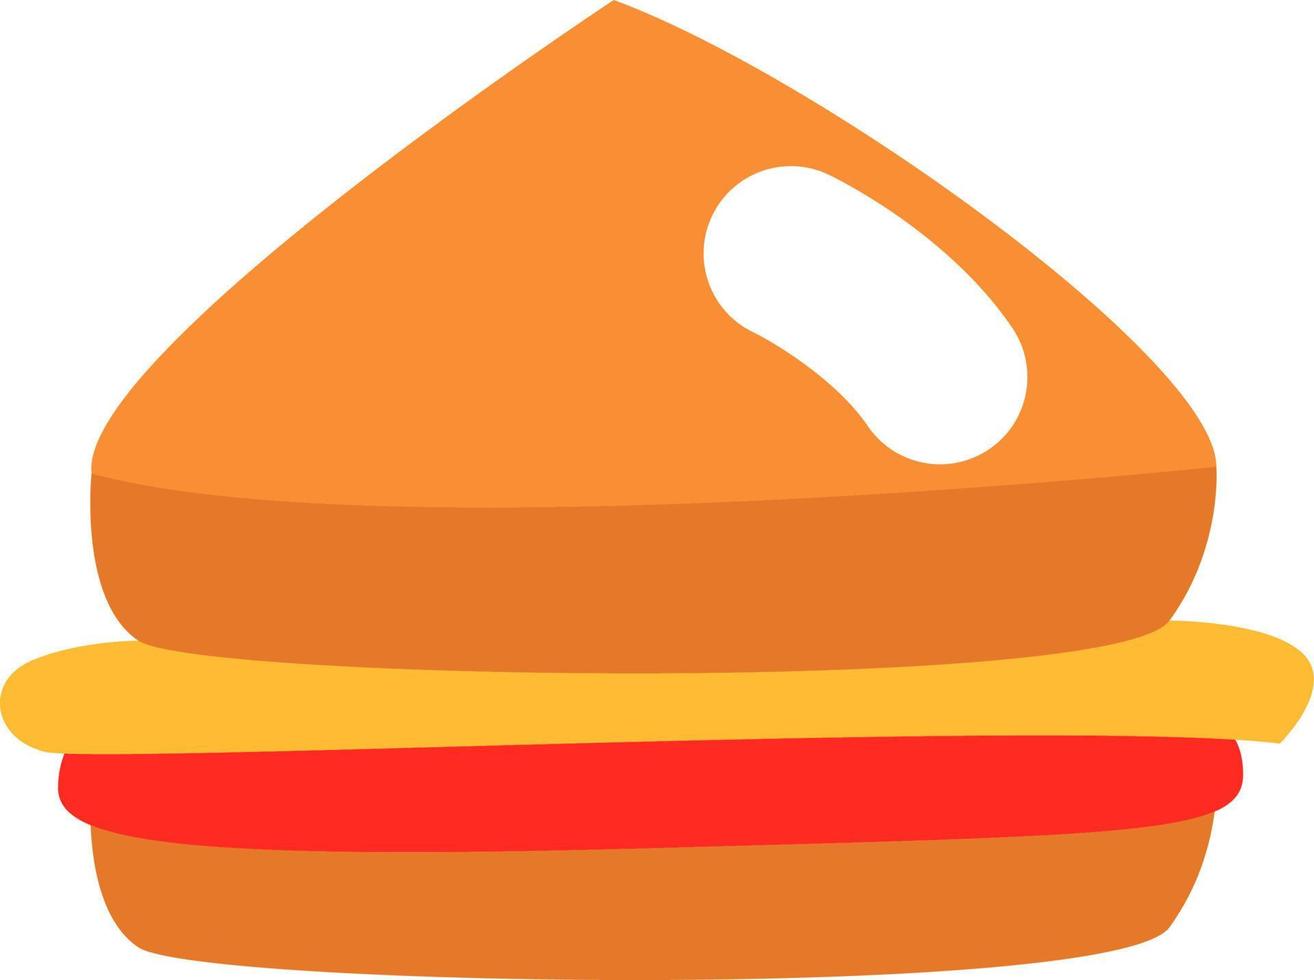 Street food sandwich, illustration, vector on a white background.